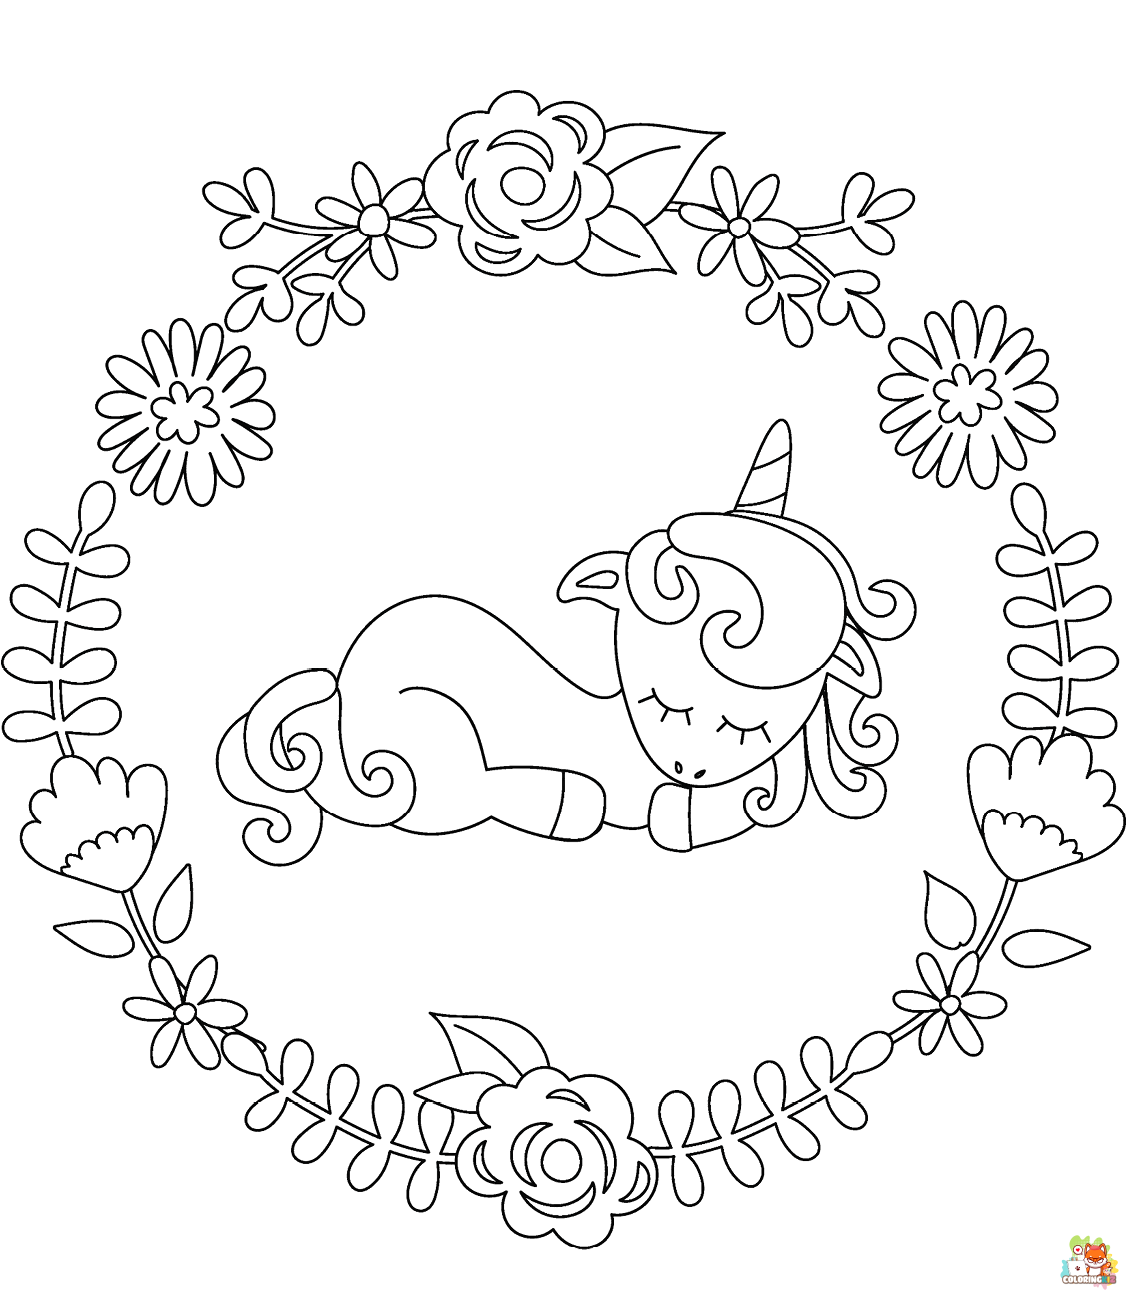 Little Unicorn Sleeping Coloring Pages 1